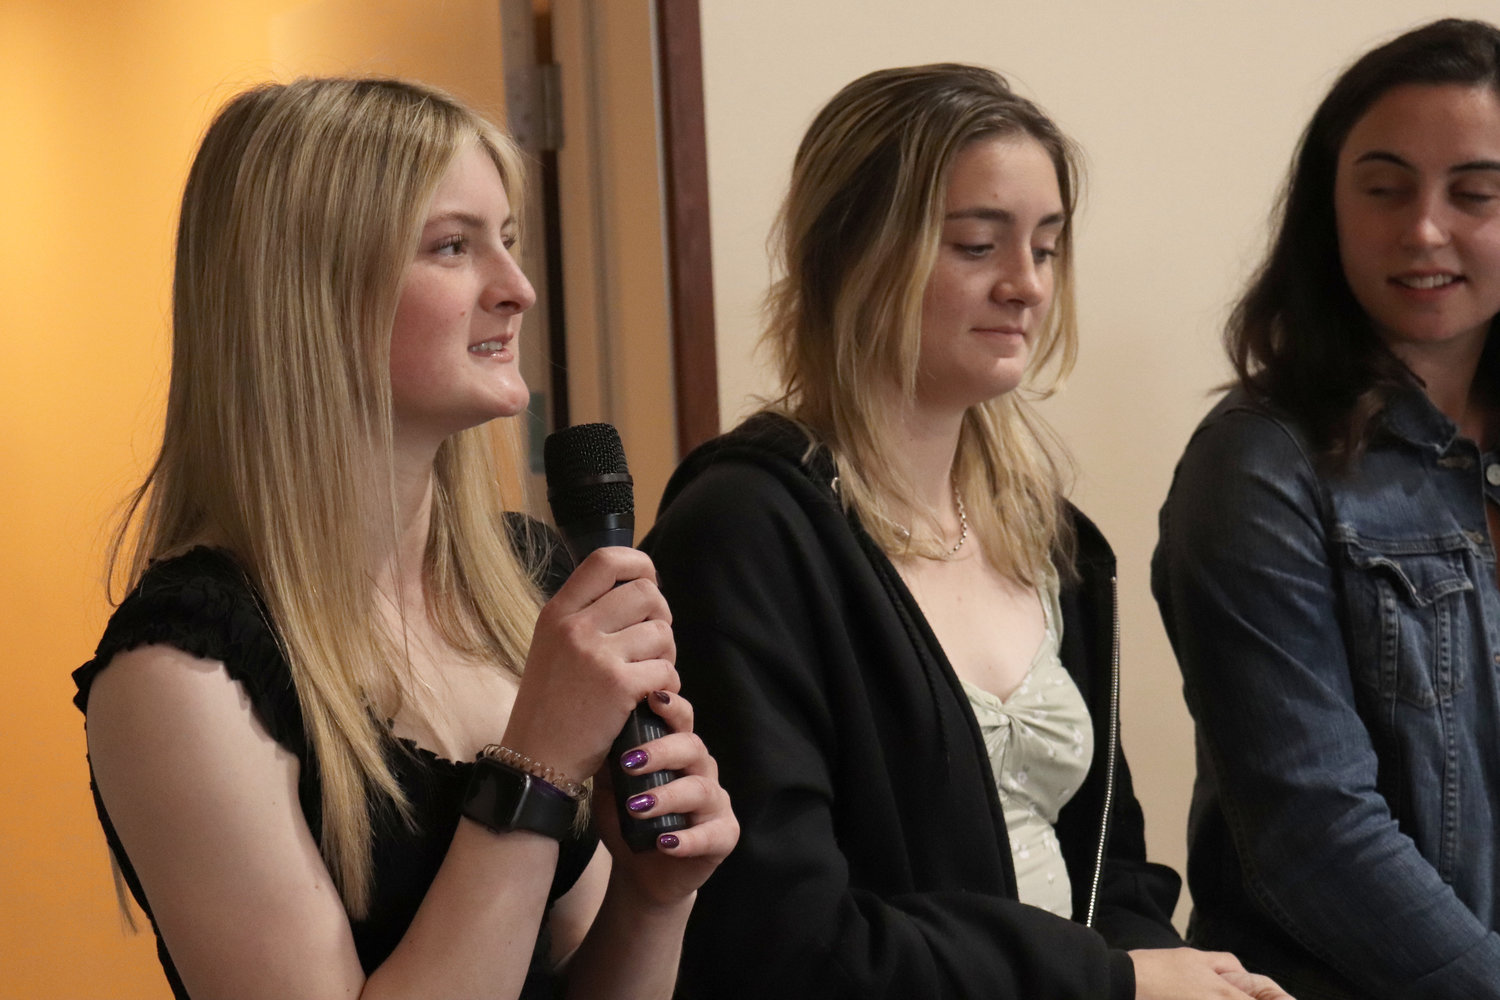 W.F. West senior Lily Bagley speaks during a scholarship luncheon in Chehalis on Monday of her plans to study psychology at Washington State University. She stands next to fellow seniors Kaylynne Dowling and Accadia Hazlett.